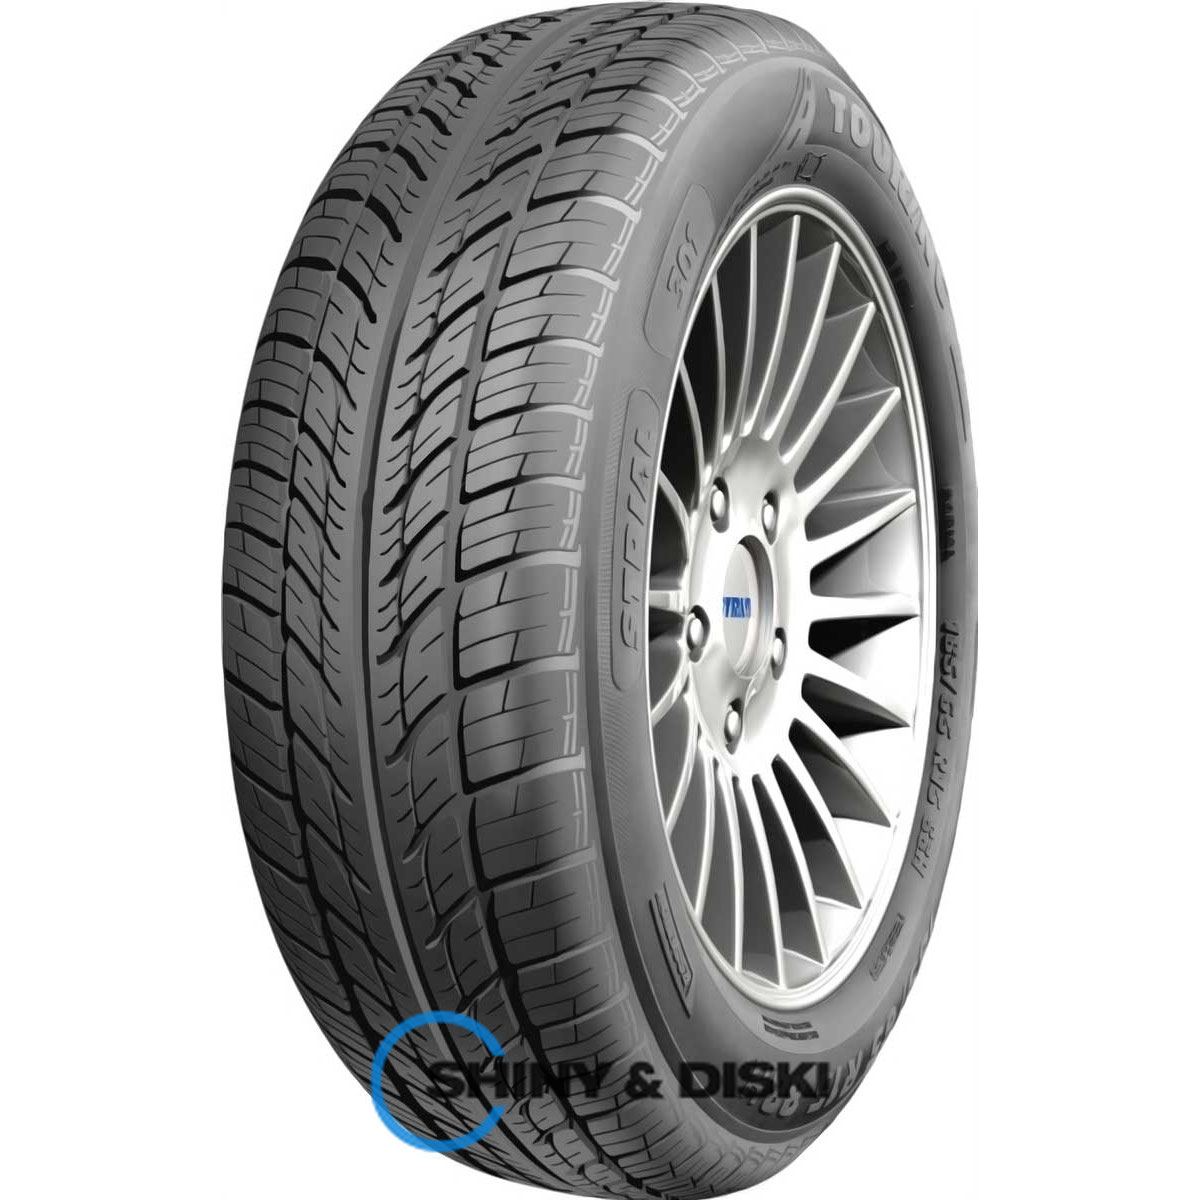 strial 301 touring 155/80 r13 79t